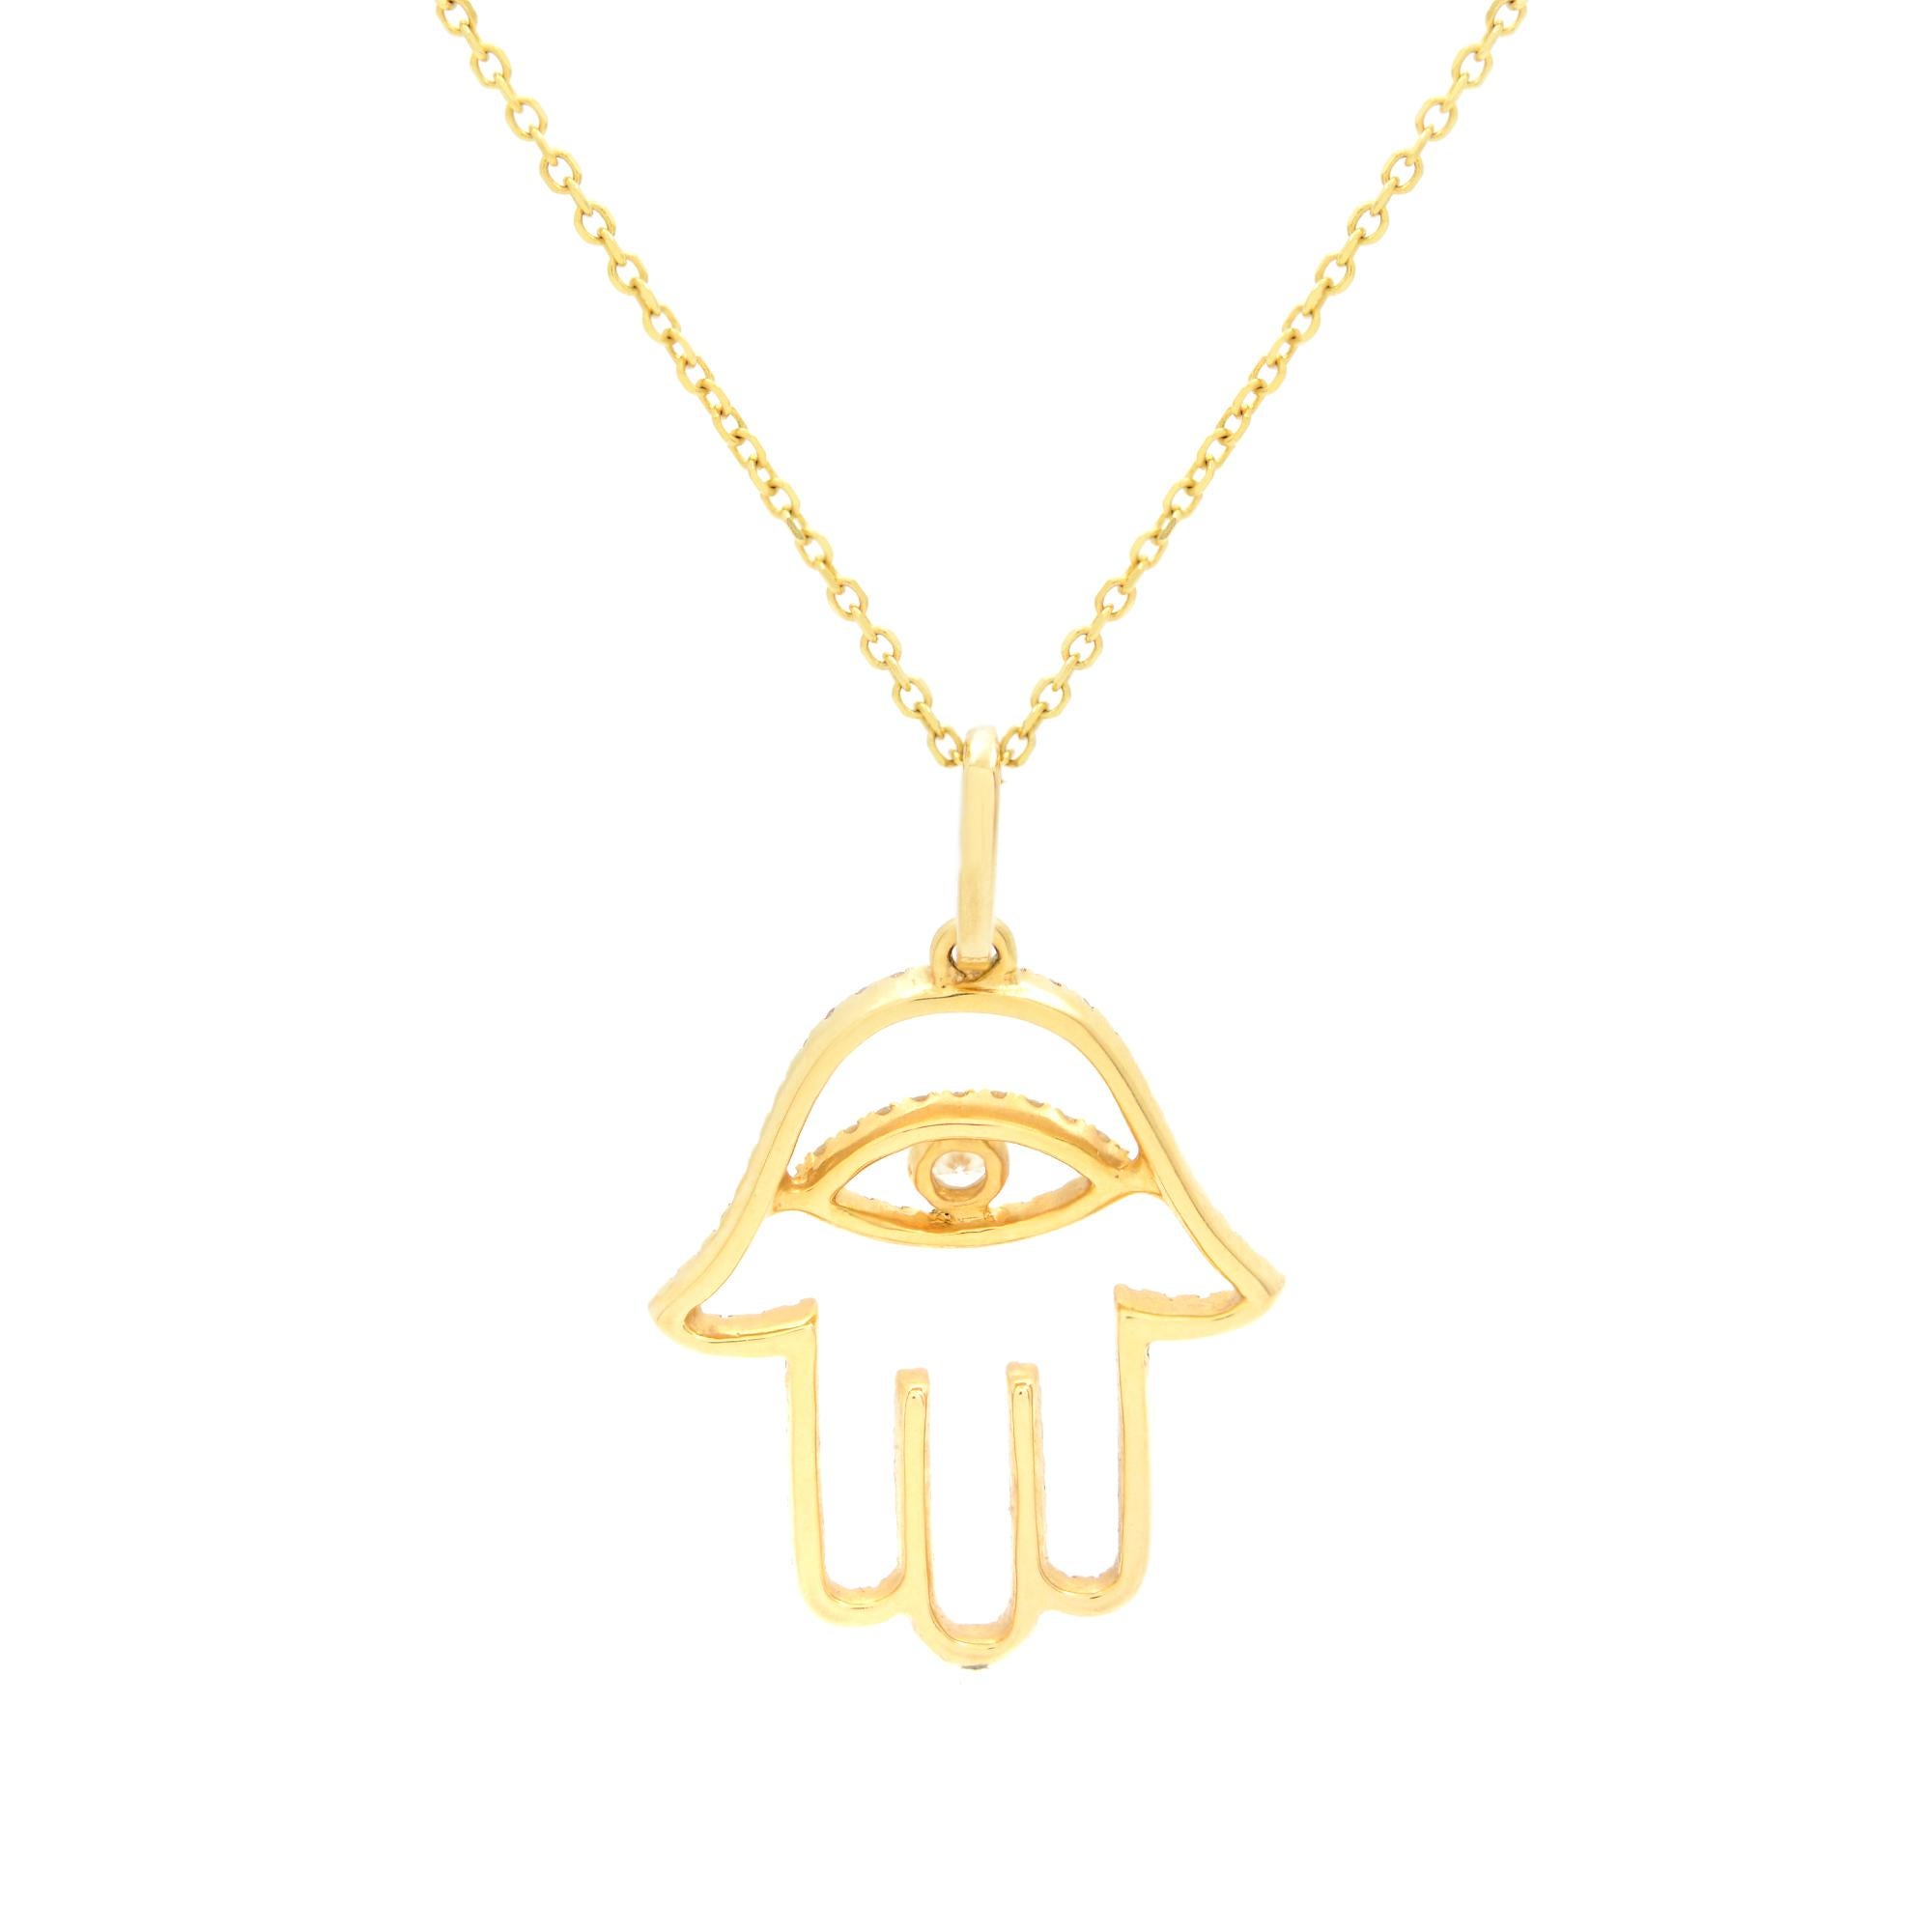 This majestic Hamsa pendant features 0.30cttw brilliant round white diamonds in micro pave setting. At the center evil eye symbol bezel set with a tiny diamond. Crafted in 18K yellow gold. Diamond color G-H and VS-SI clarity. Pendant size: 25x16mm.